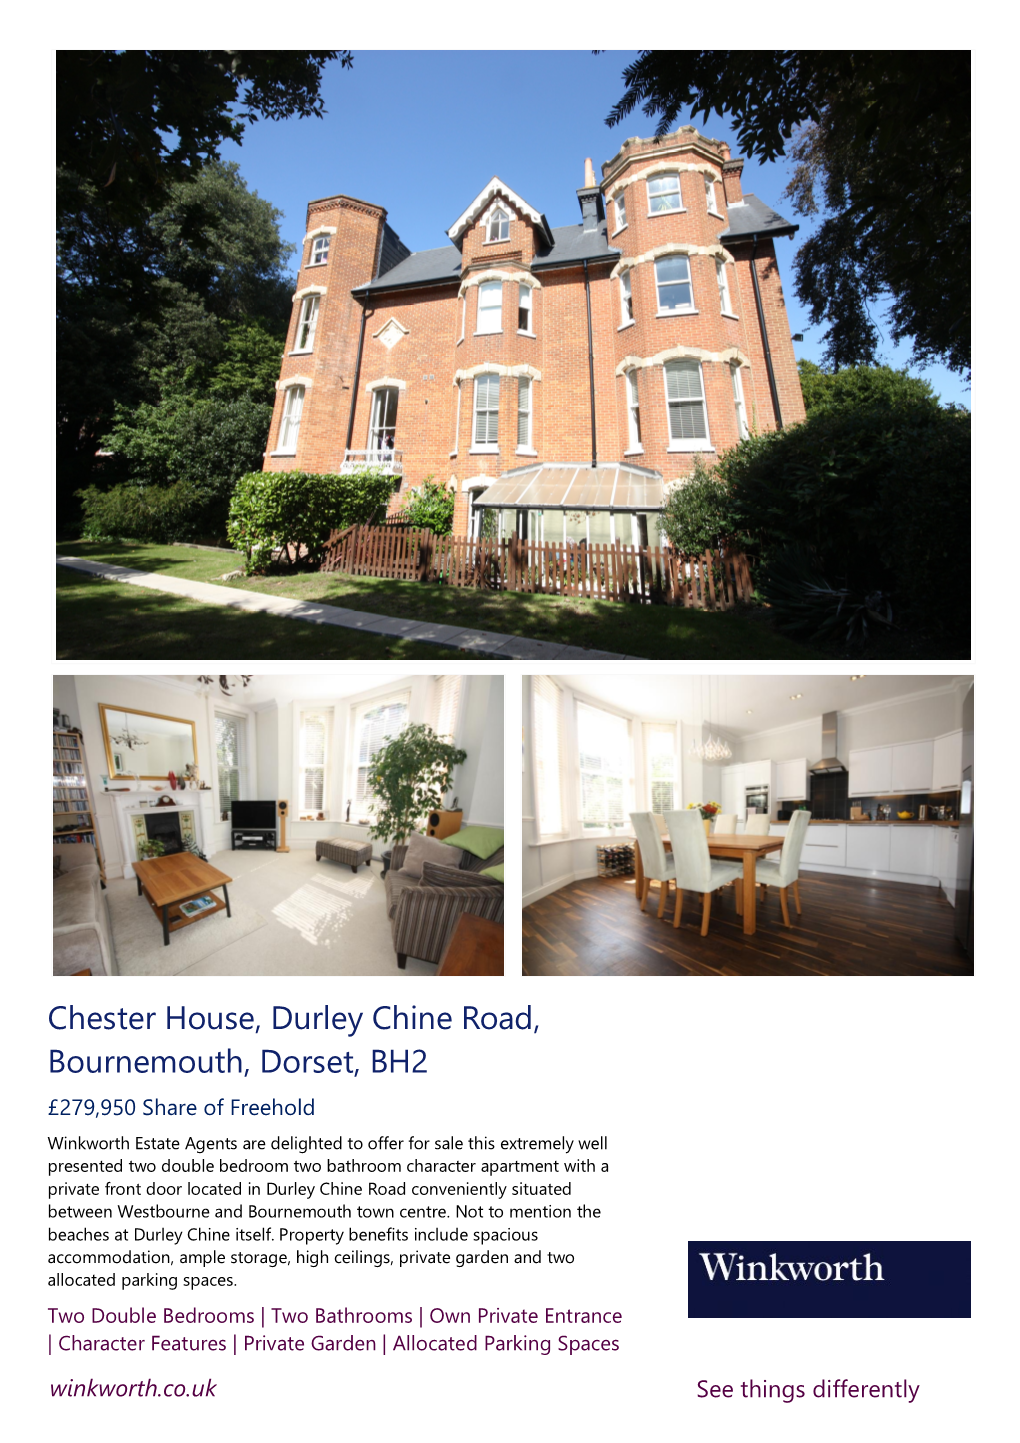 Chester House, Durley Chine Road, Bournemouth, Dorset